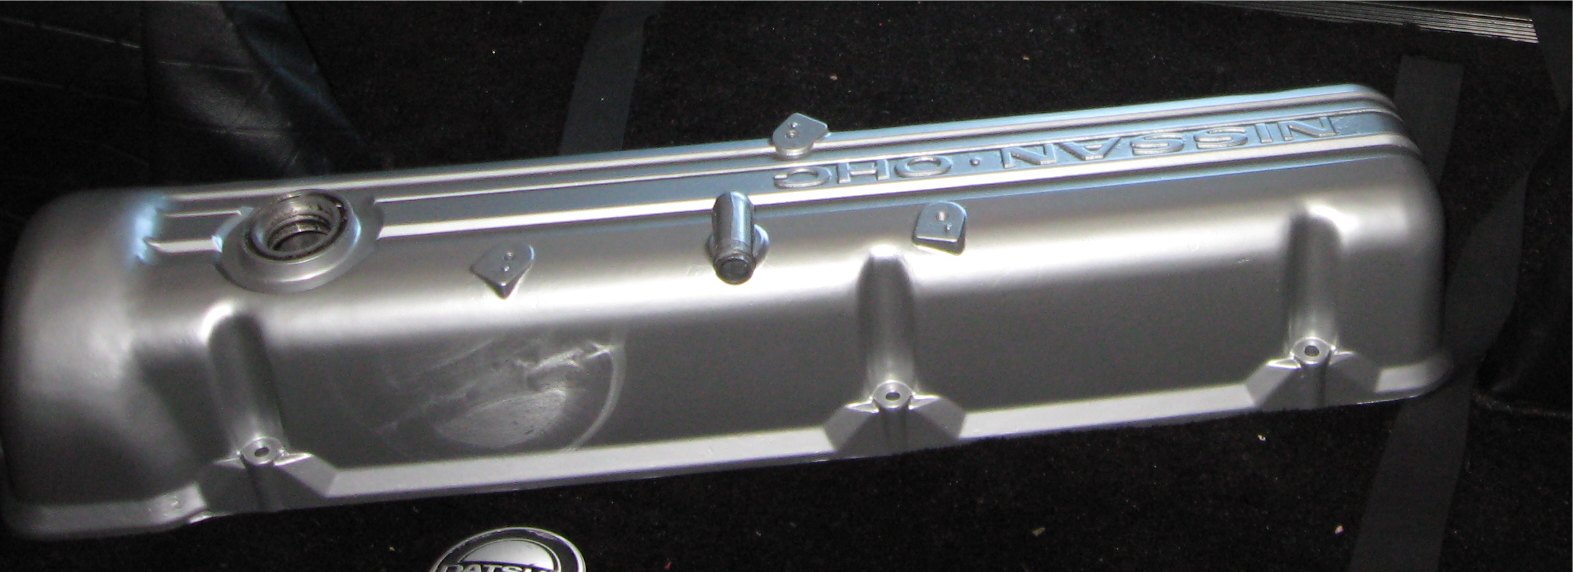 Stock Valve Cover Finish - Open Discussions - The Classic Zcar Club